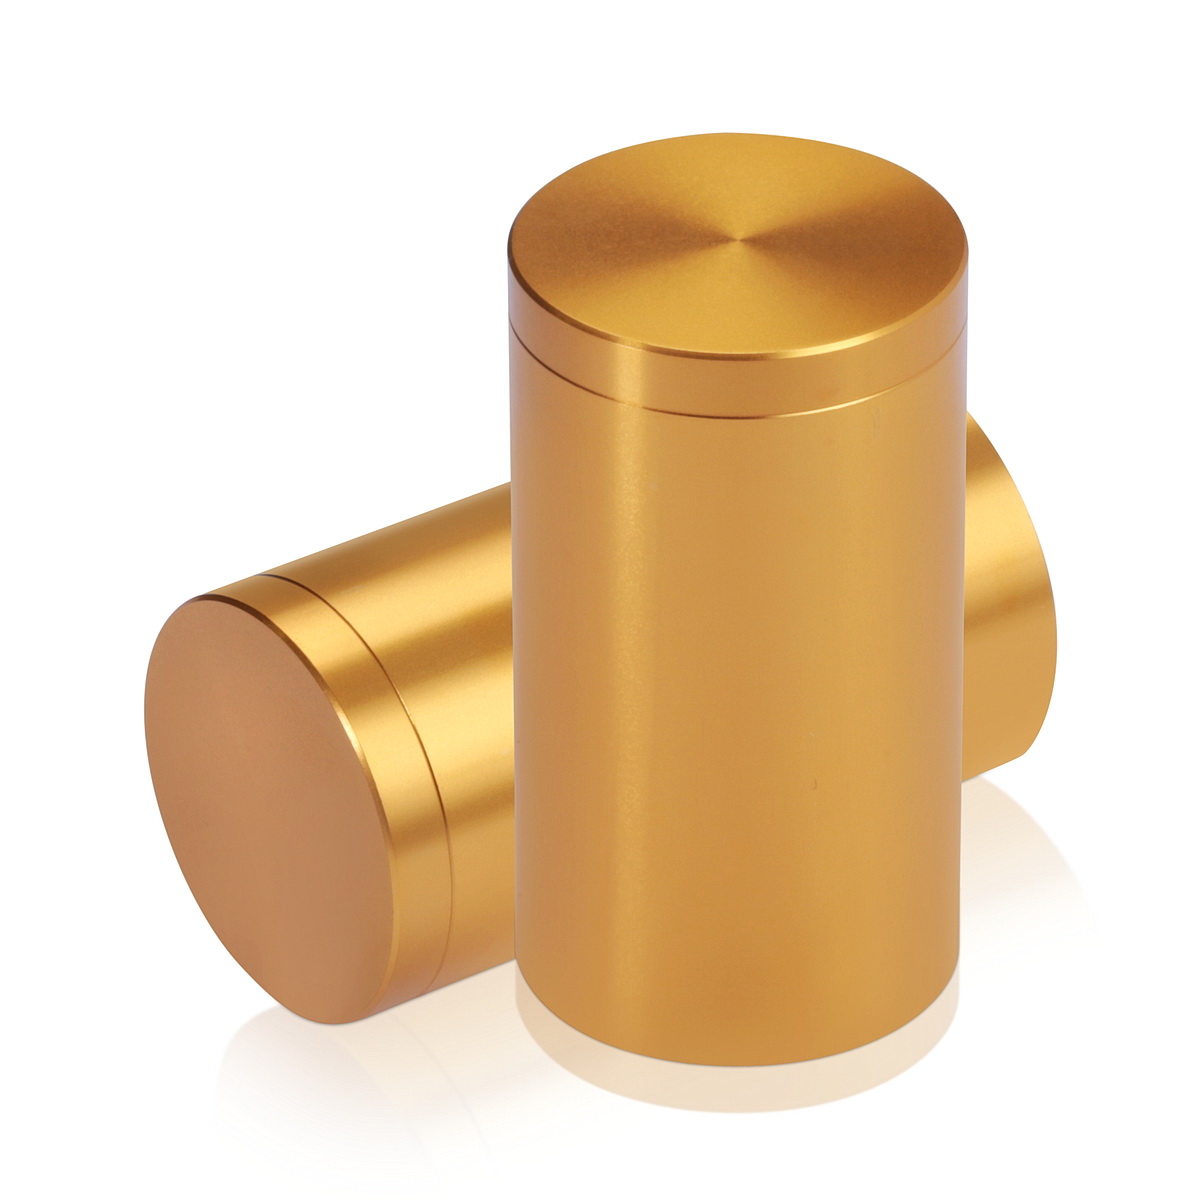 1-1/4'' Diameter X 2'' Barrel Length, Affordable Aluminum Standoffs, Gold Anodized Finish Easy Fasten Standoff (For Inside / Outside use) [Required Material Hole Size: 7/16'']